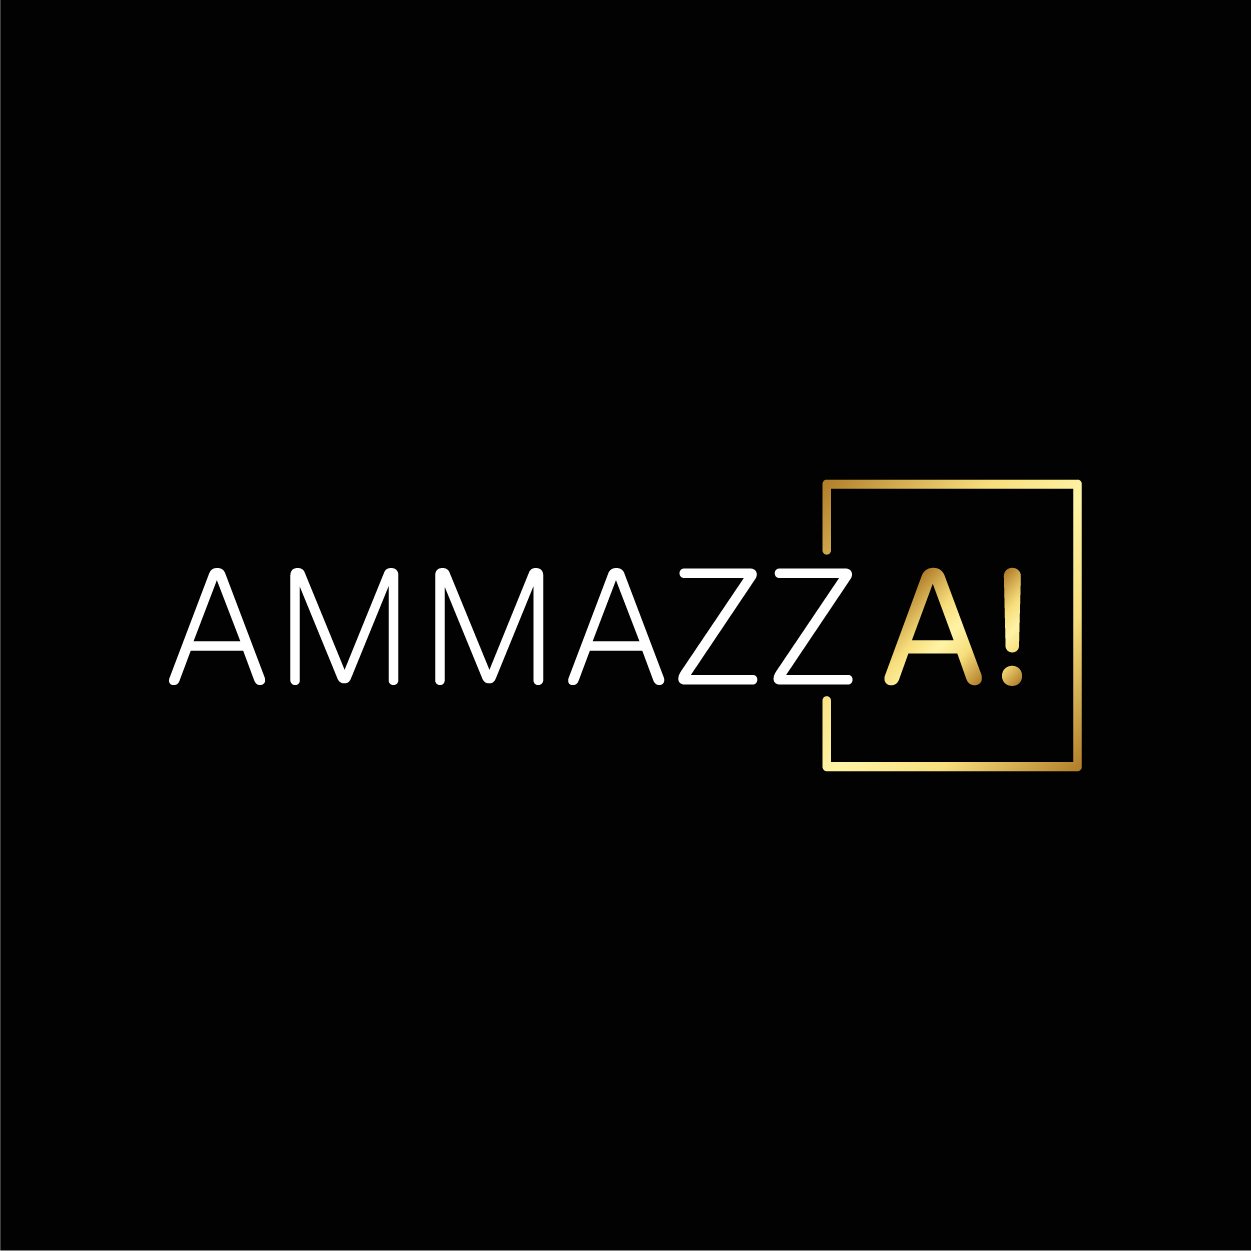 Ammazza! consistently presents you with the #jewellery you love. Powered by #artificial #intelligence.

Website: https://t.co/pUwRZoH15W